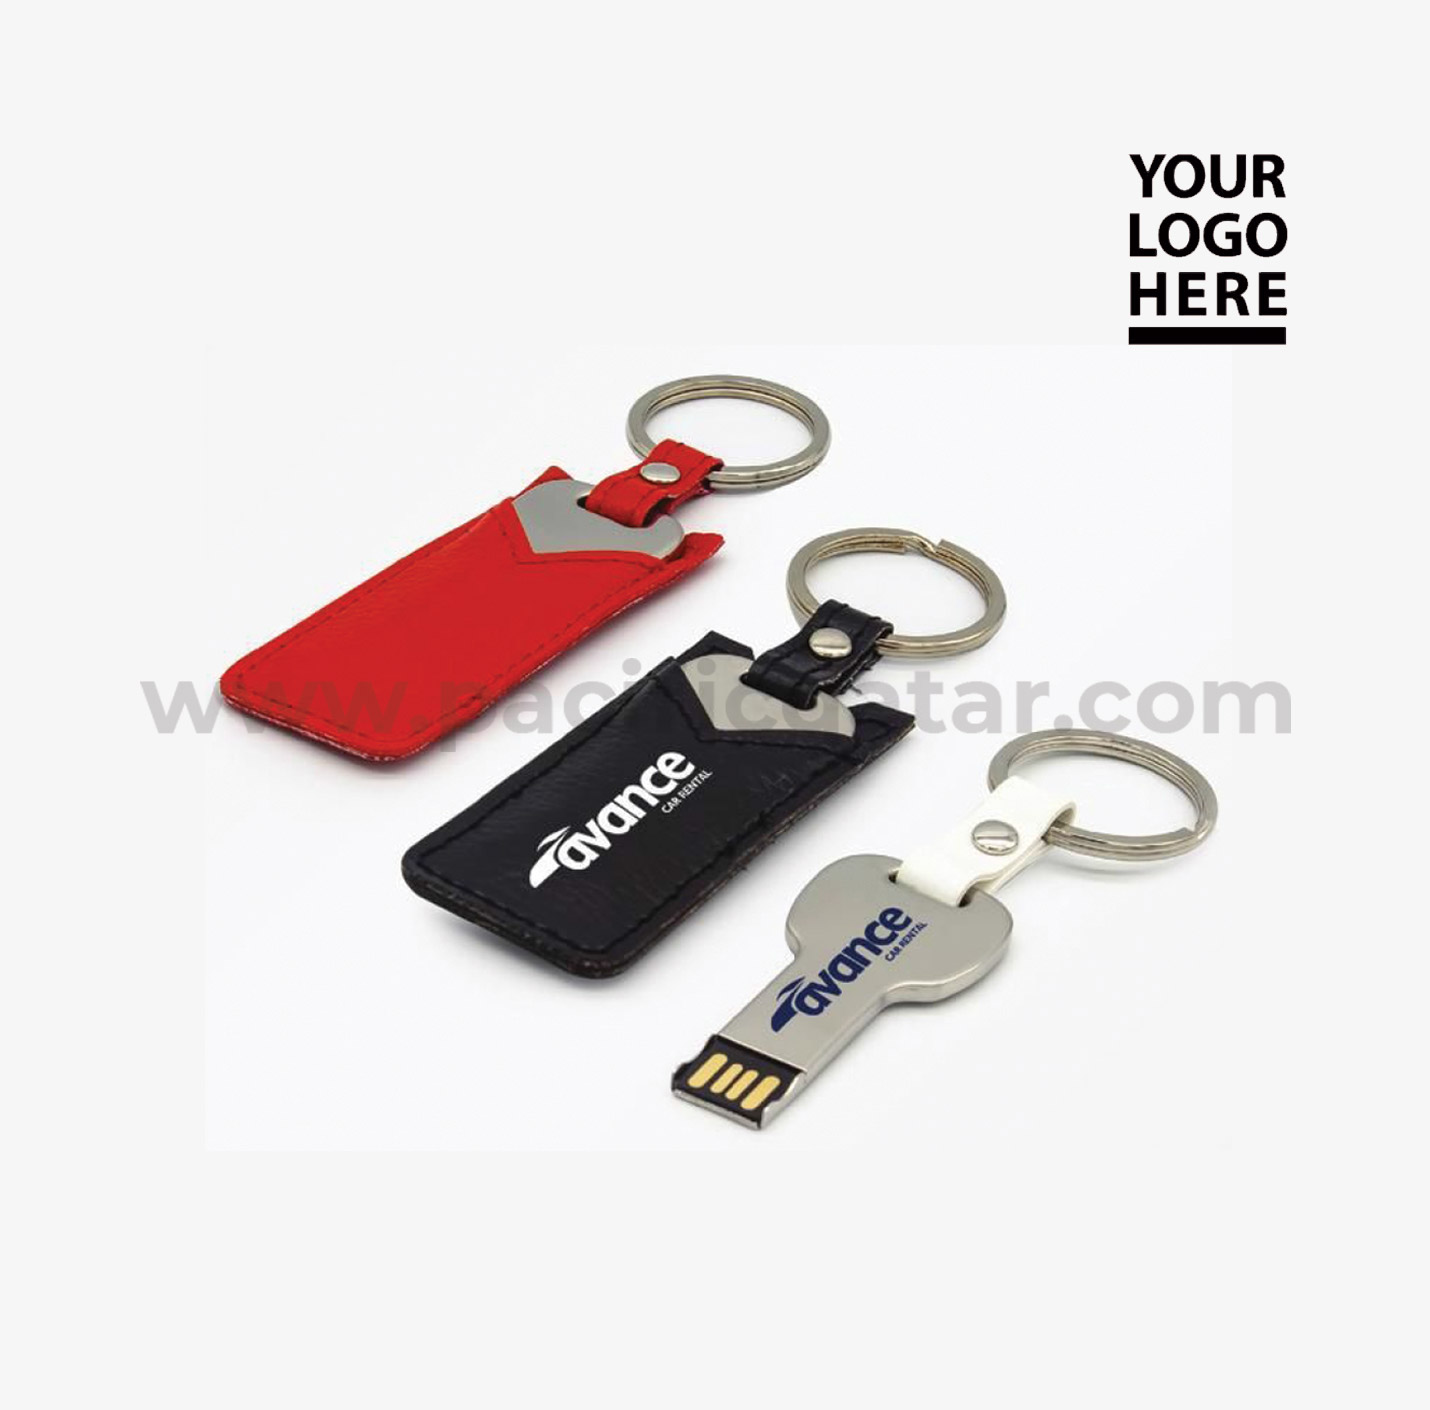 USB Flash Drive with Leather Case